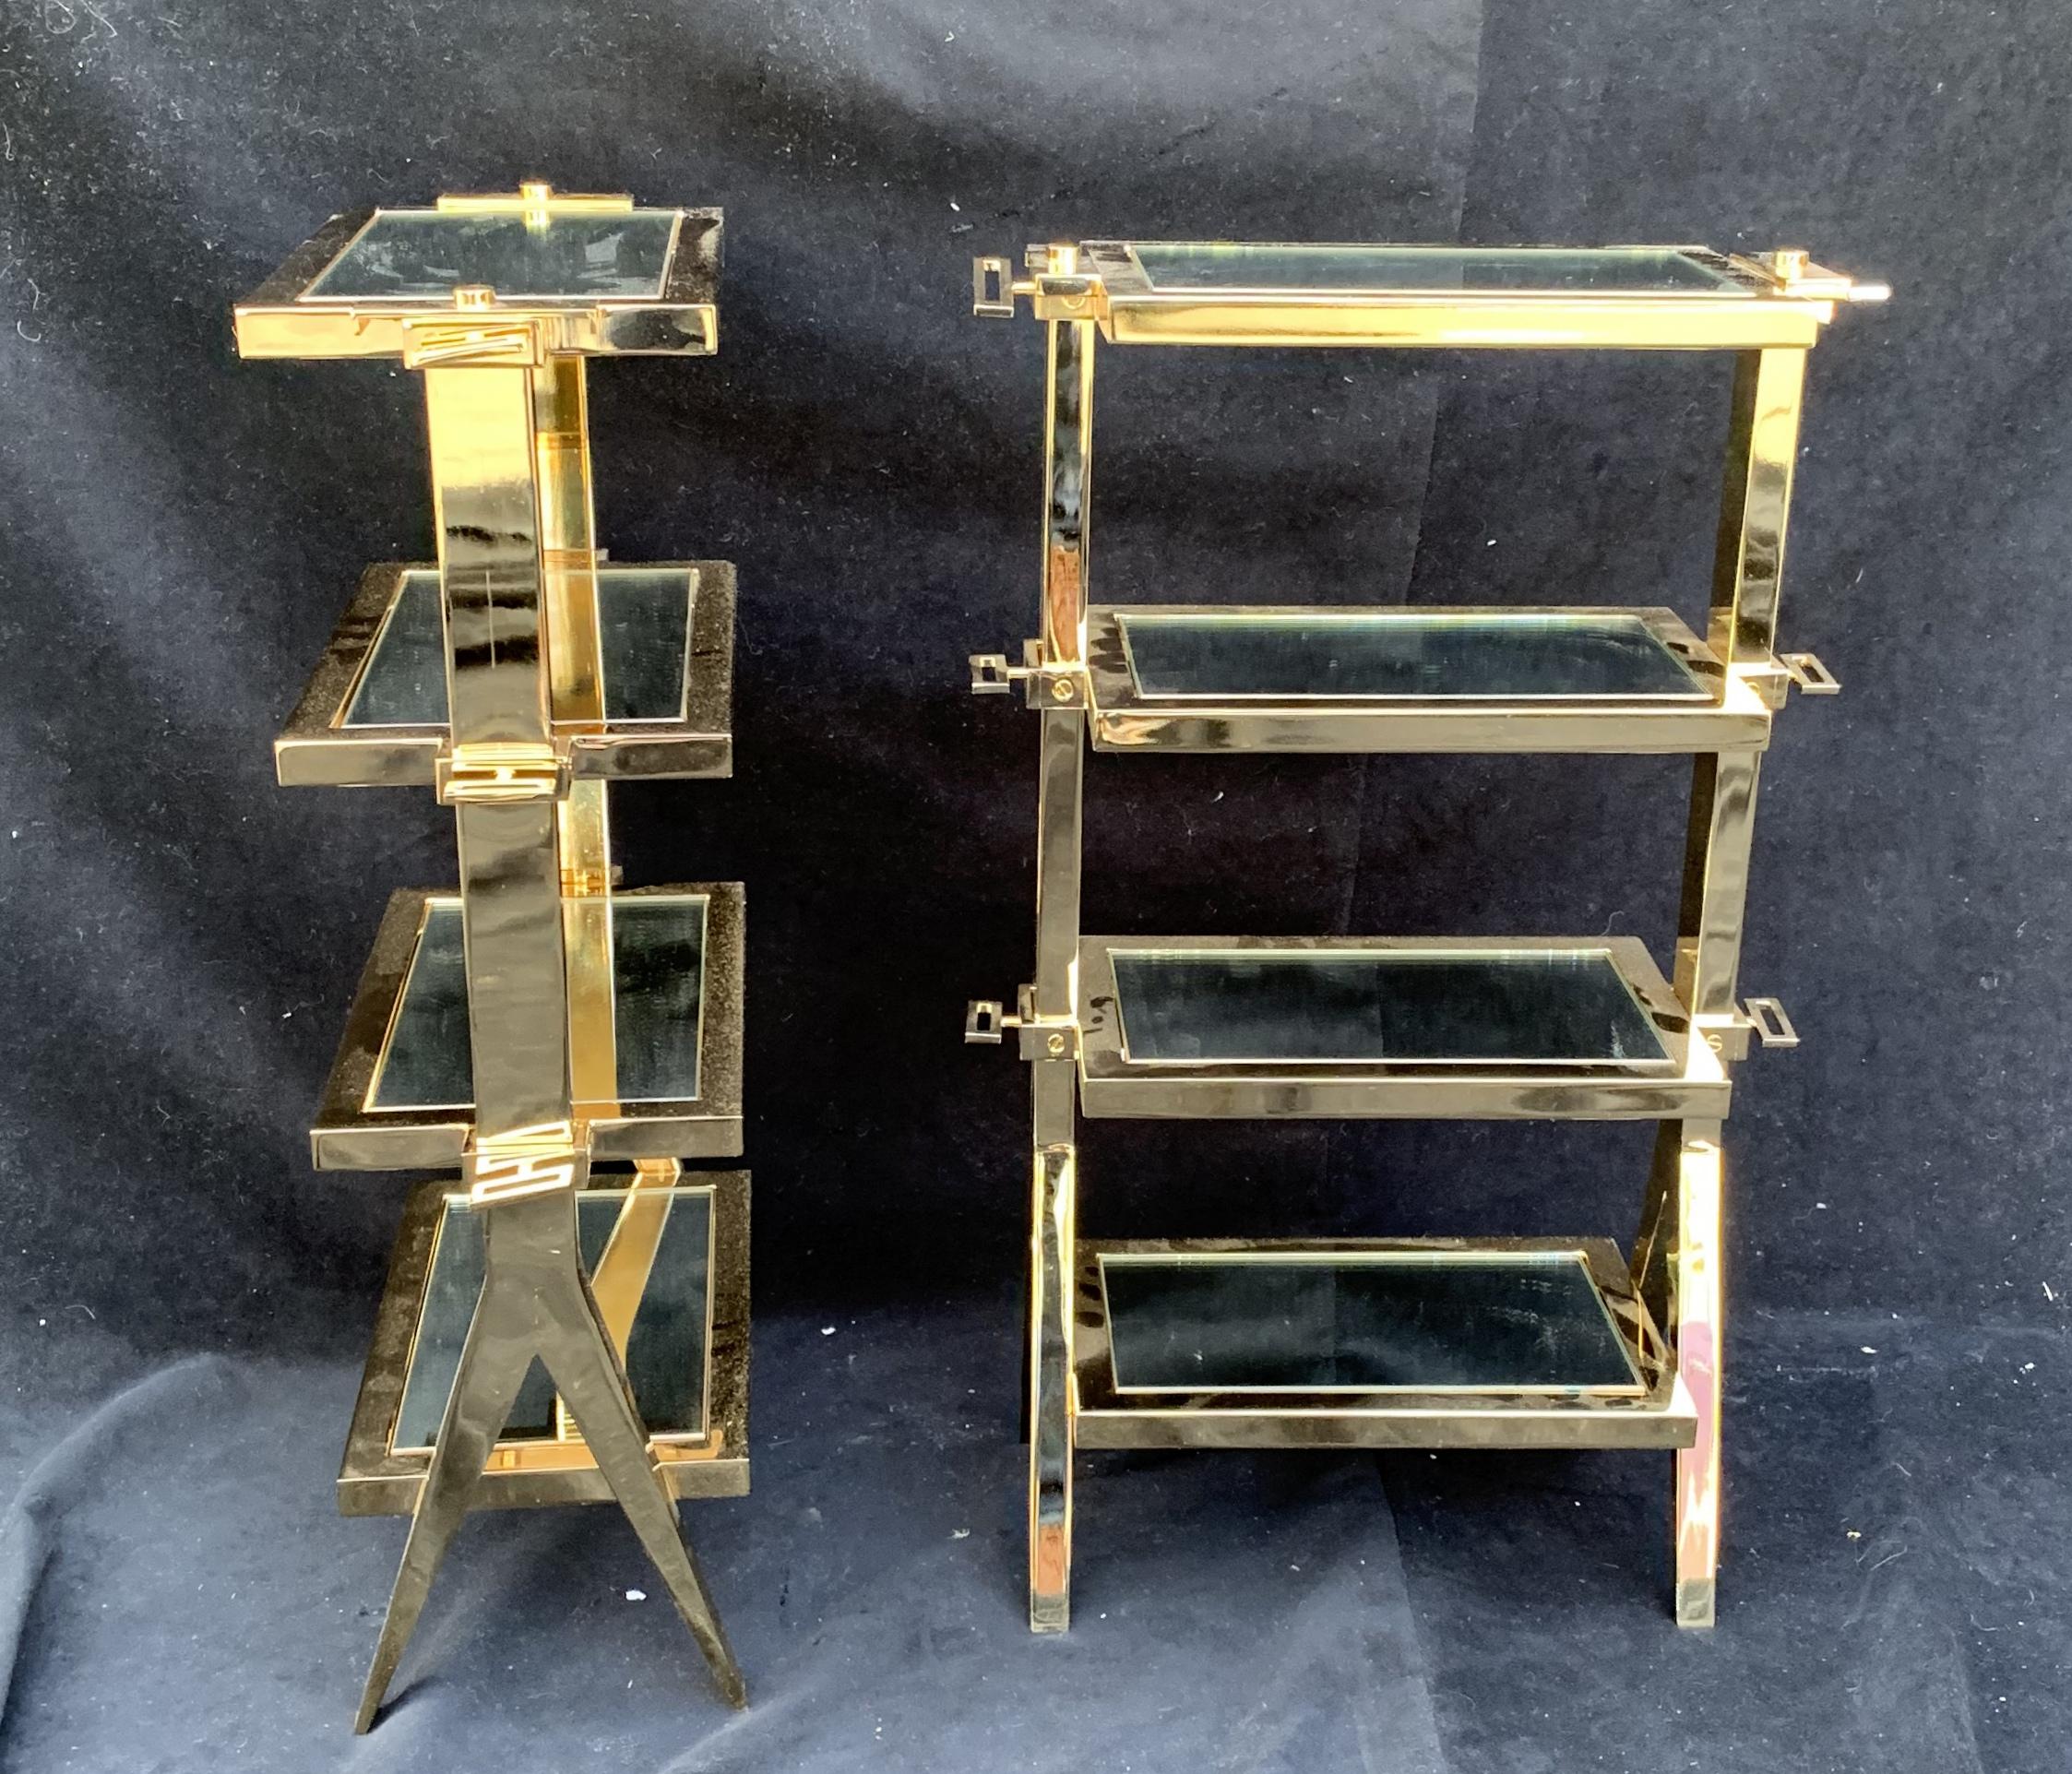 A wonderful Mid-Century Modern pair of four-tier polished brass / bronze inset with mirror shelves side tables from the world famous Lorin Marsh showroom.

Each sold separately.